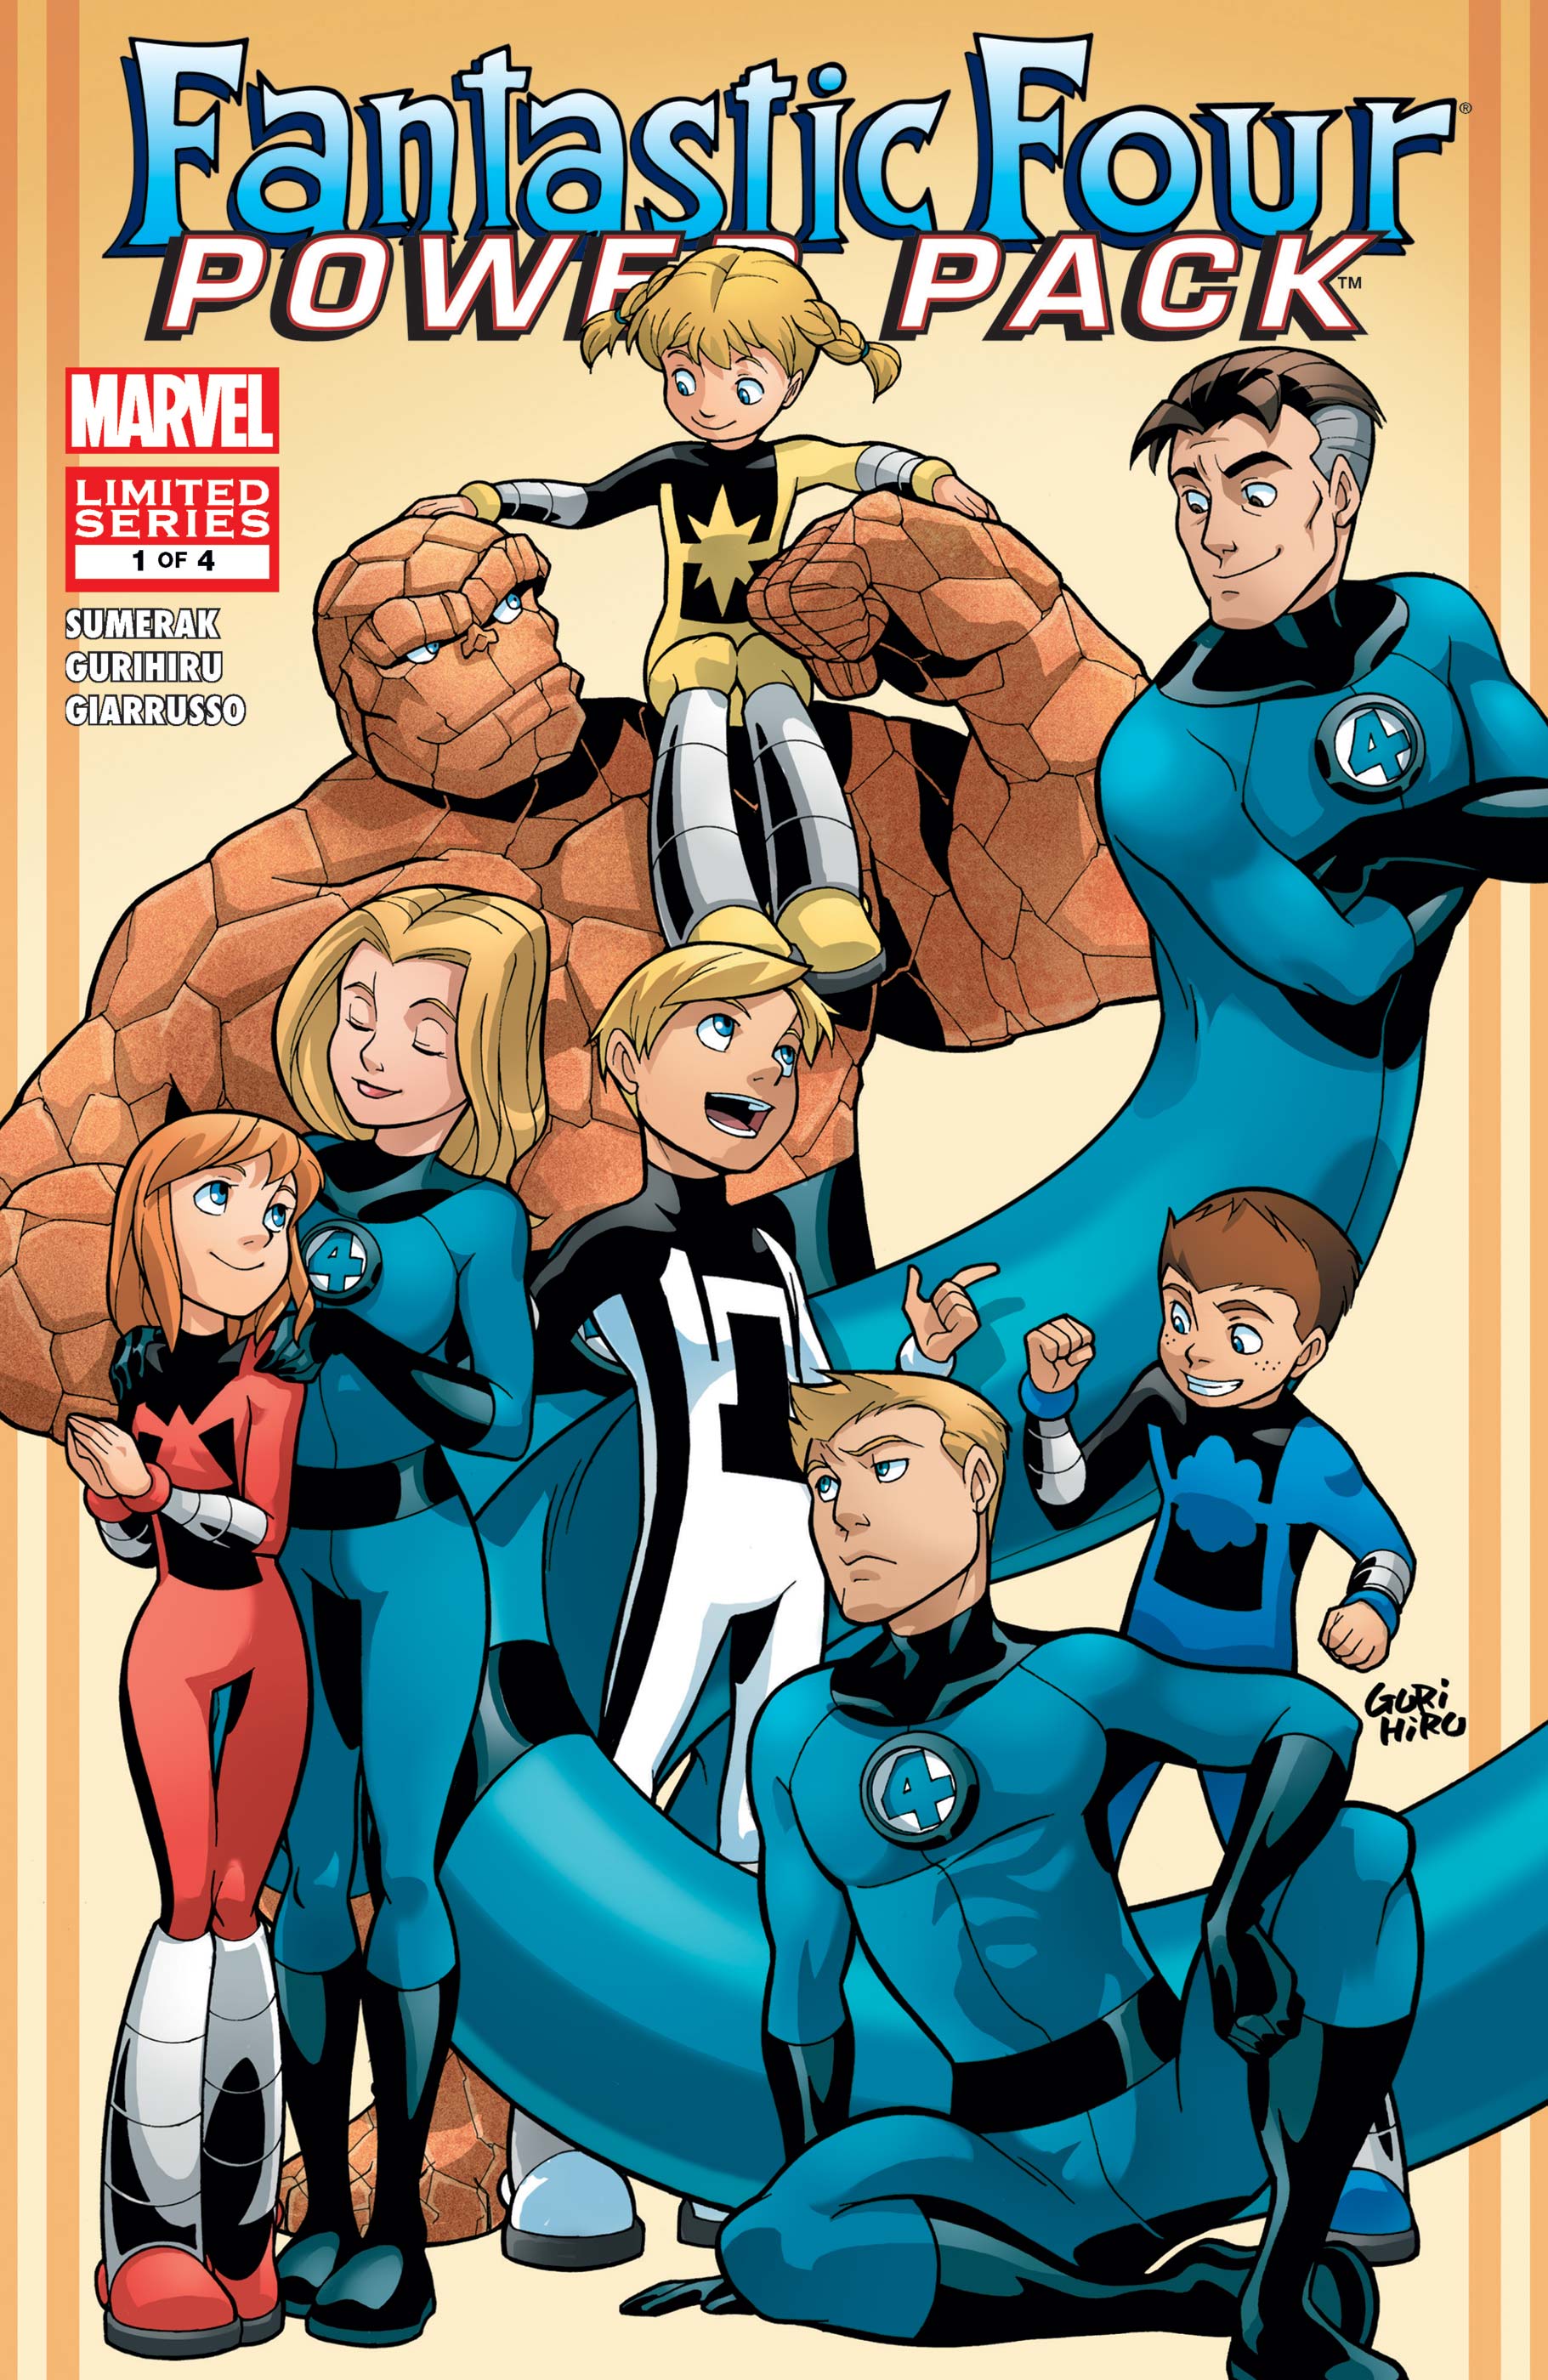 Fantastic Four and Power Pack (2007) #1, Comic Issues